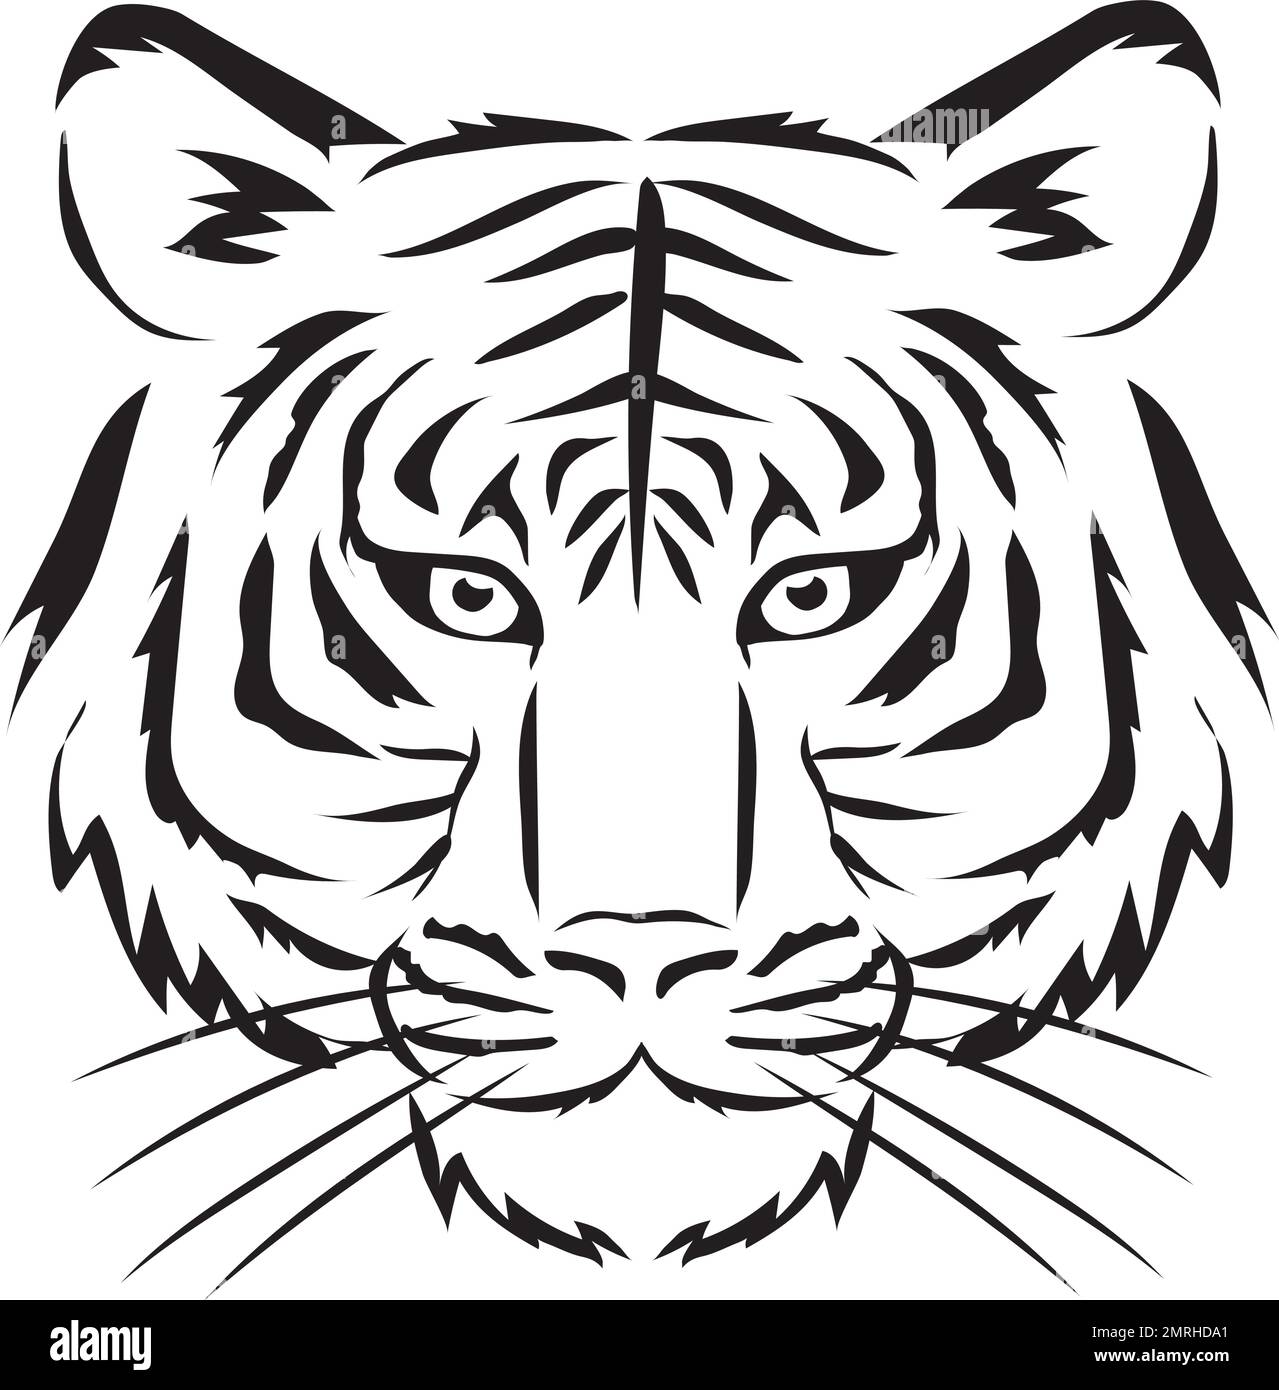 Vector illustration of a tiger's face facing forward. Black and white style. New Year's card material for the year of the tiger. Stock Vector